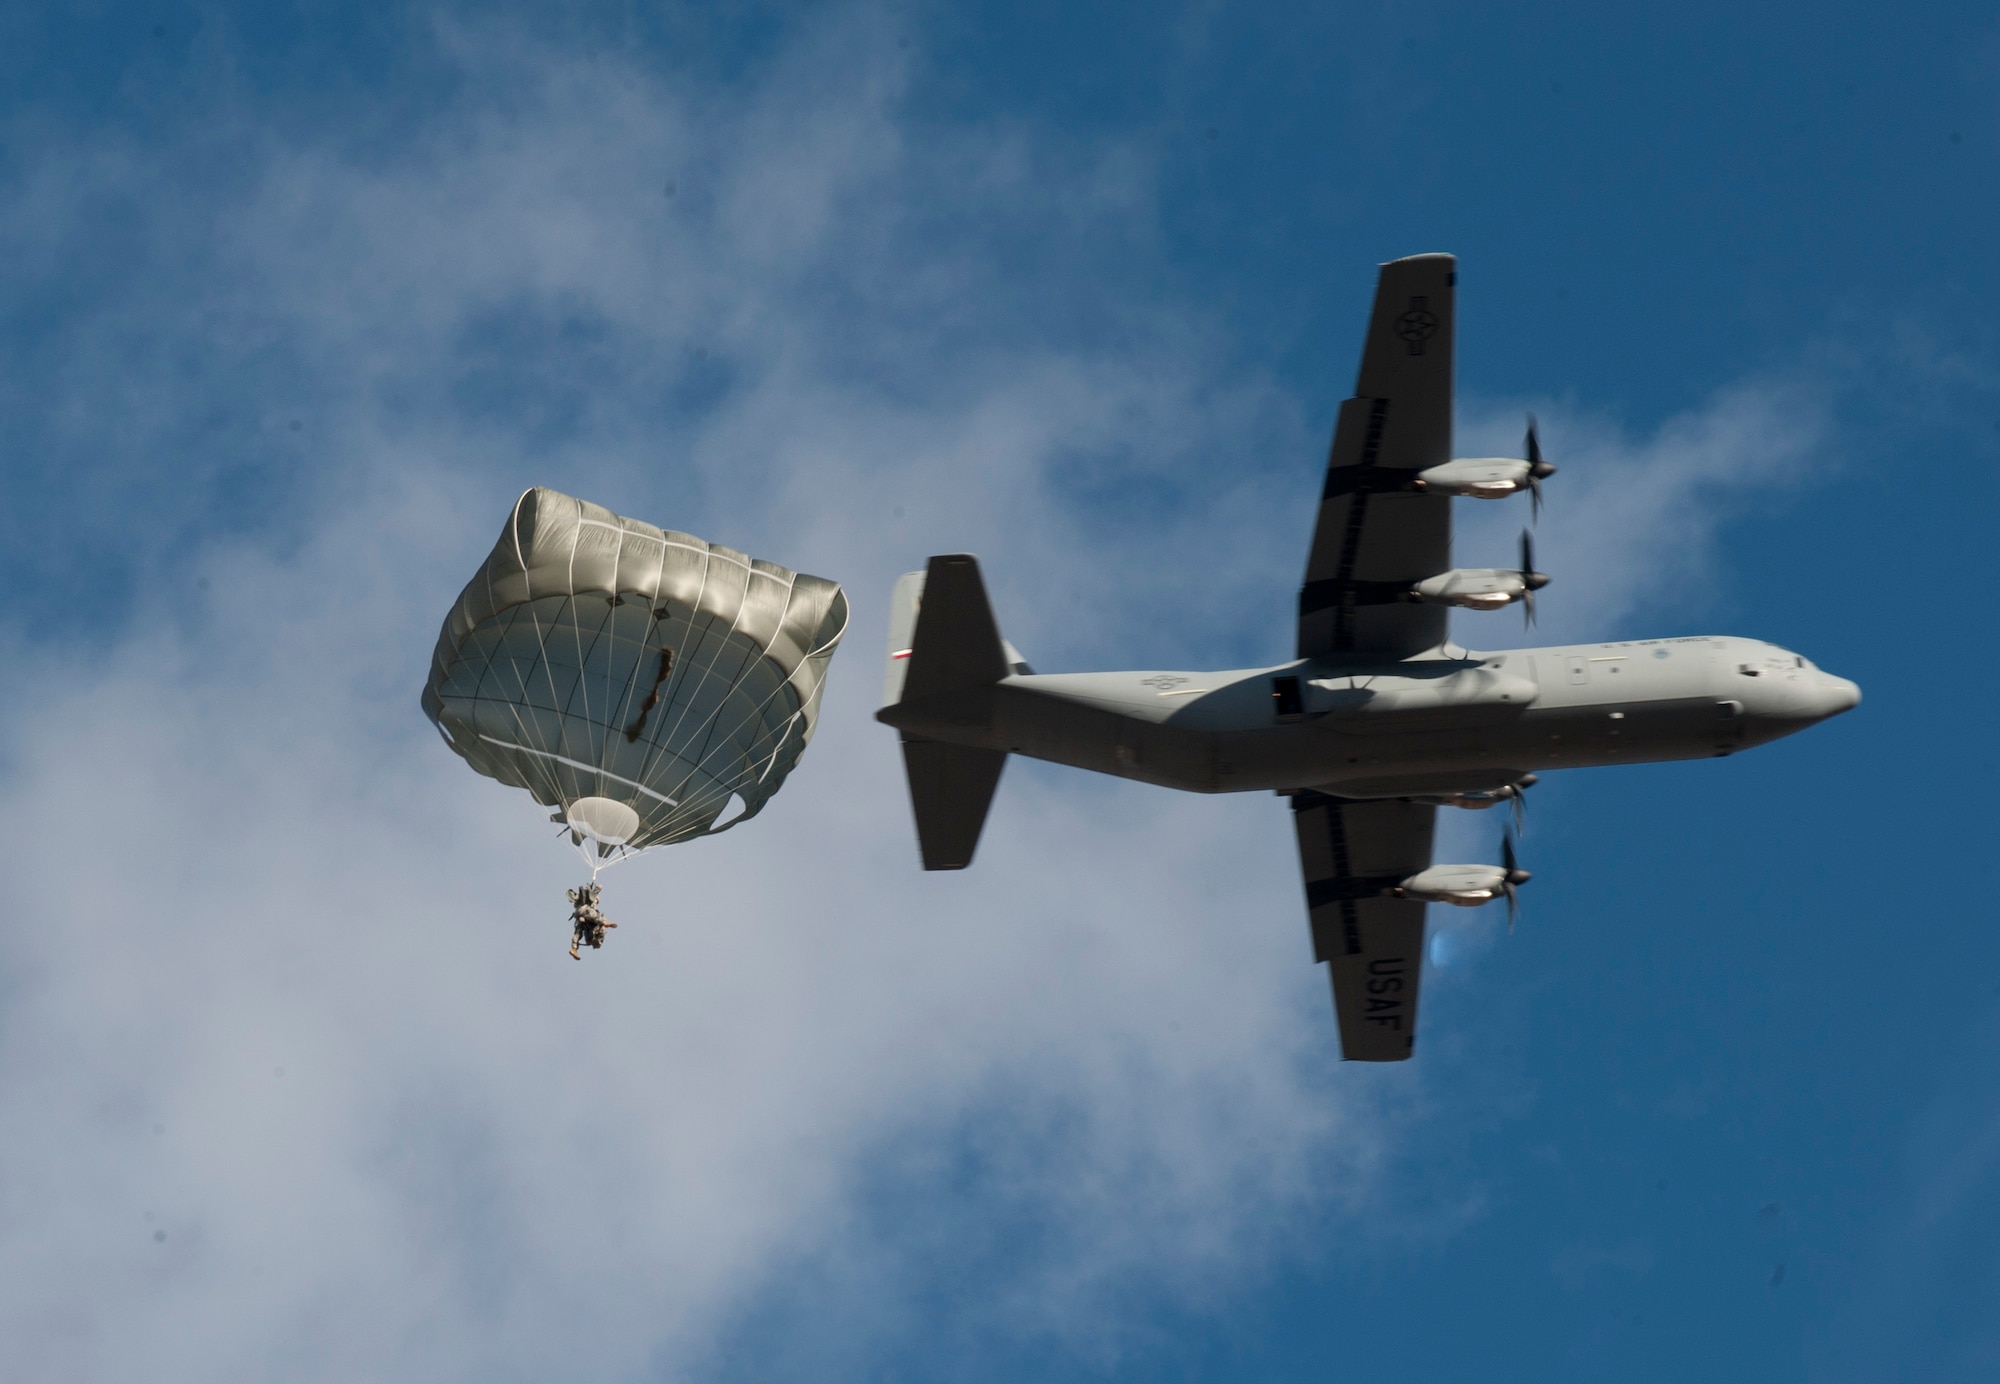 A paratrooper assigned to the 3rd Brigade Combat Team, 82nd Airborne Division, Fort Bragg, N.C., descends from a U.S. Air Force C-130 Hercules during the U.S. Air Force Weapons School's Joint Forcible Entry Exercise 14B over the Nevada Test and Training Range Dec. 6, 2014. JFEX exercises are held twice annually to maintain rapid deployment capabilities between Army and Air Force assets. (U.S. Air Force photo by Airman First Class Joshua Kleinholz)